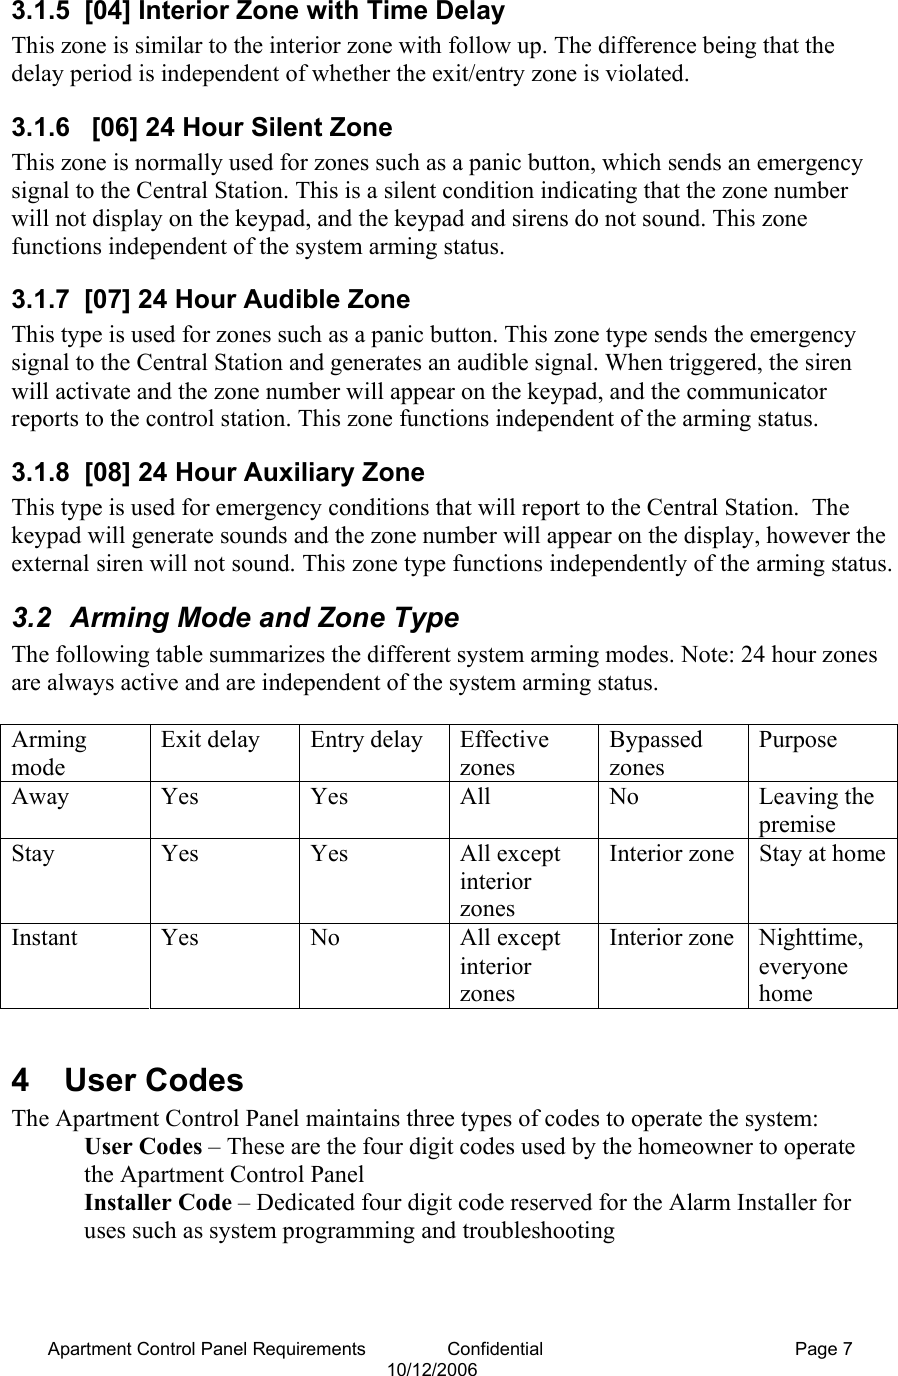 Apartment Control Panel Requirements                Confidential  Page 7 10/12/2006 3.1.5  [04] Interior Zone with Time Delay This zone is similar to the interior zone with follow up. The difference being that the delay period is independent of whether the exit/entry zone is violated. 3.1.6   [06] 24 Hour Silent Zone This zone is normally used for zones such as a panic button, which sends an emergency signal to the Central Station. This is a silent condition indicating that the zone number will not display on the keypad, and the keypad and sirens do not sound. This zone functions independent of the system arming status. 3.1.7  [07] 24 Hour Audible Zone This type is used for zones such as a panic button. This zone type sends the emergency signal to the Central Station and generates an audible signal. When triggered, the siren will activate and the zone number will appear on the keypad, and the communicator reports to the control station. This zone functions independent of the arming status. 3.1.8 [08] 24 Hour Auxiliary Zone This type is used for emergency conditions that will report to the Central Station.  The keypad will generate sounds and the zone number will appear on the display, however the external siren will not sound. This zone type functions independently of the arming status. 3.2  Arming Mode and Zone Type The following table summarizes the different system arming modes. Note: 24 hour zones are always active and are independent of the system arming status.  Arming mode Exit delay  Entry delay  Effective zones Bypassed zones Purpose Away Yes  Yes  All  No  Leaving the premise  Stay Yes  Yes  All except interior zones Interior zone  Stay at homeInstant   Yes  No  All except interior zones Interior zone  Nighttime, everyone home  4  User Codes The Apartment Control Panel maintains three types of codes to operate the system: User Codes – These are the four digit codes used by the homeowner to operate the Apartment Control Panel Installer Code – Dedicated four digit code reserved for the Alarm Installer for uses such as system programming and troubleshooting 